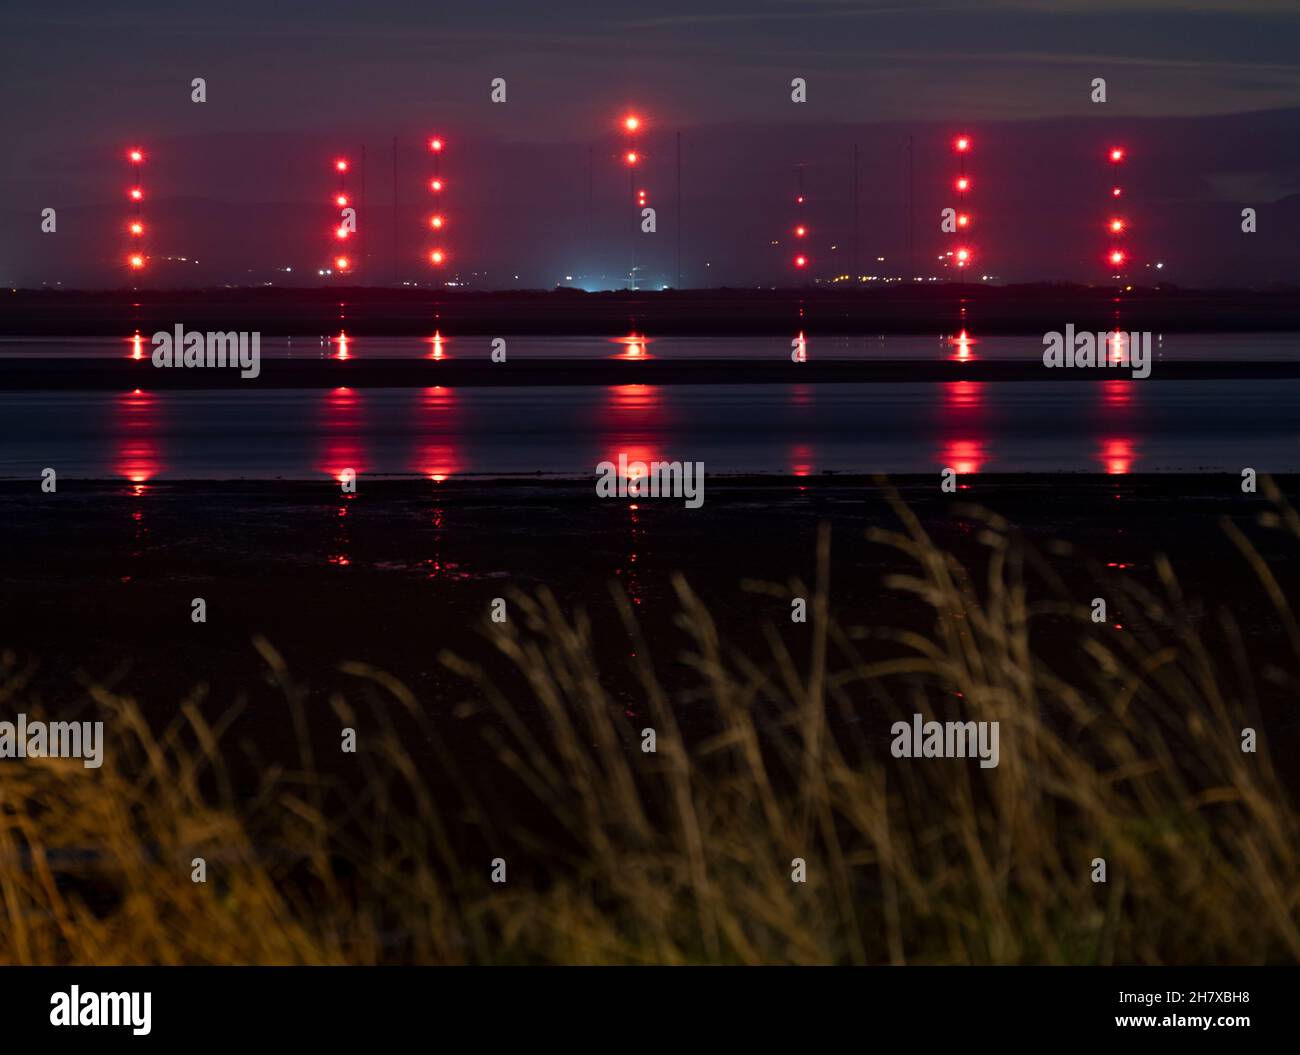 A view of the Anthorn Radio station in Cumbria, ENgland seen from across the Solway Firth, Scotland at night with the lights glowing on the masts. Stock Photo